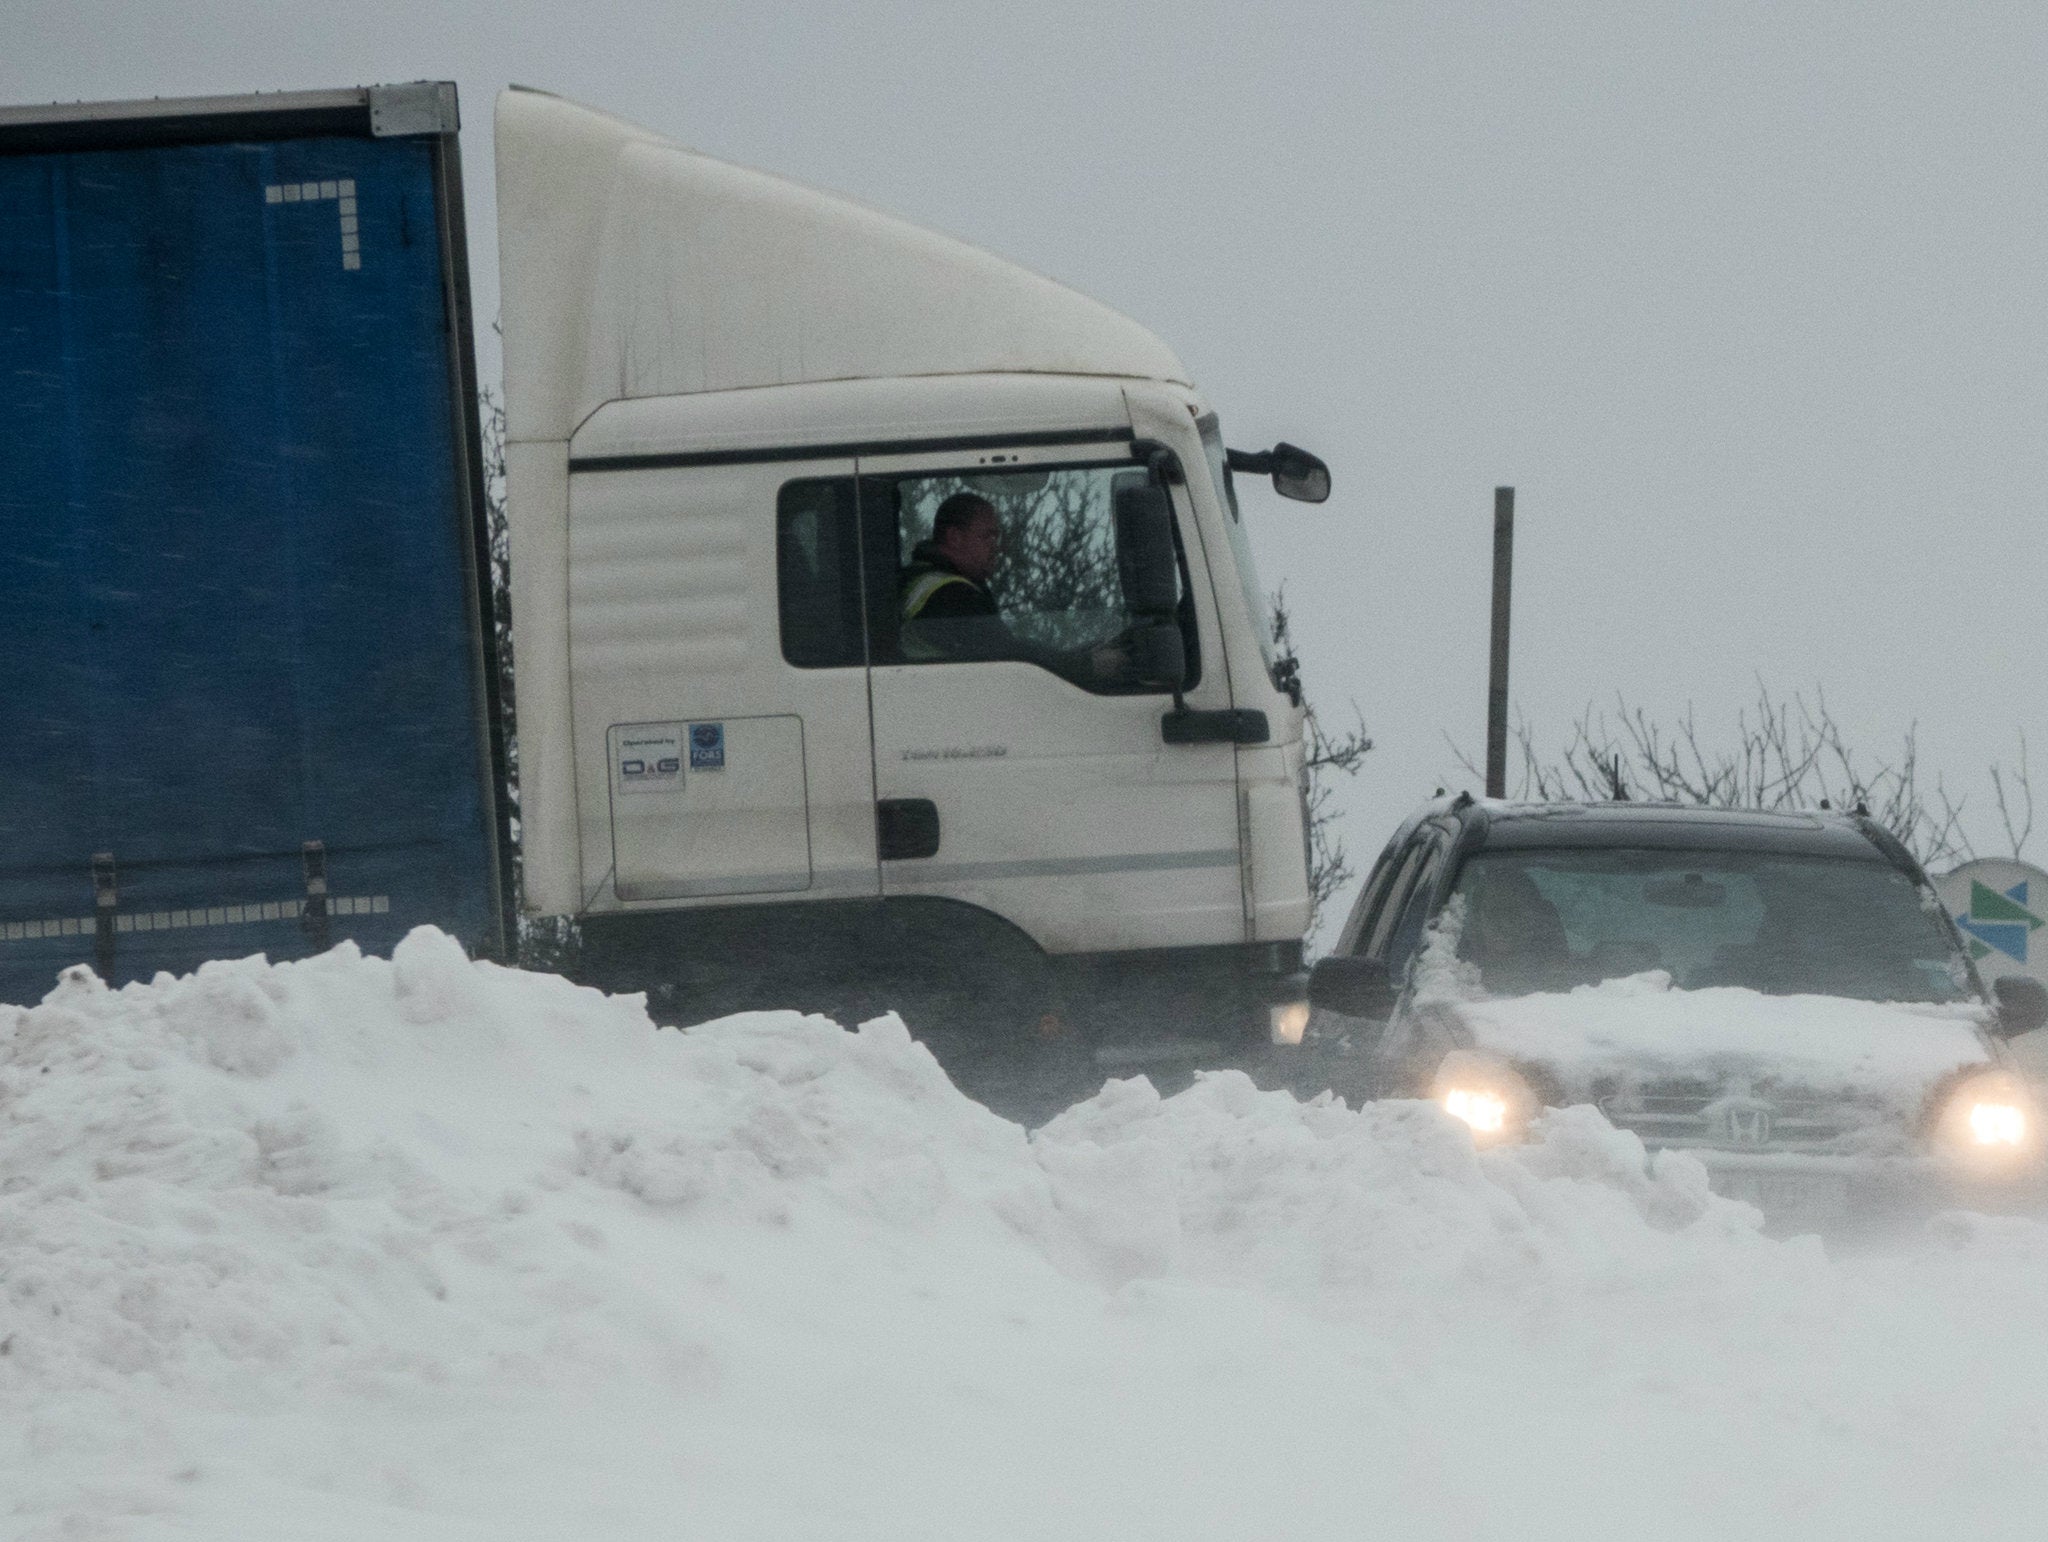 Lorries and cars being stuck in snow has been slowing down business turnover and growth